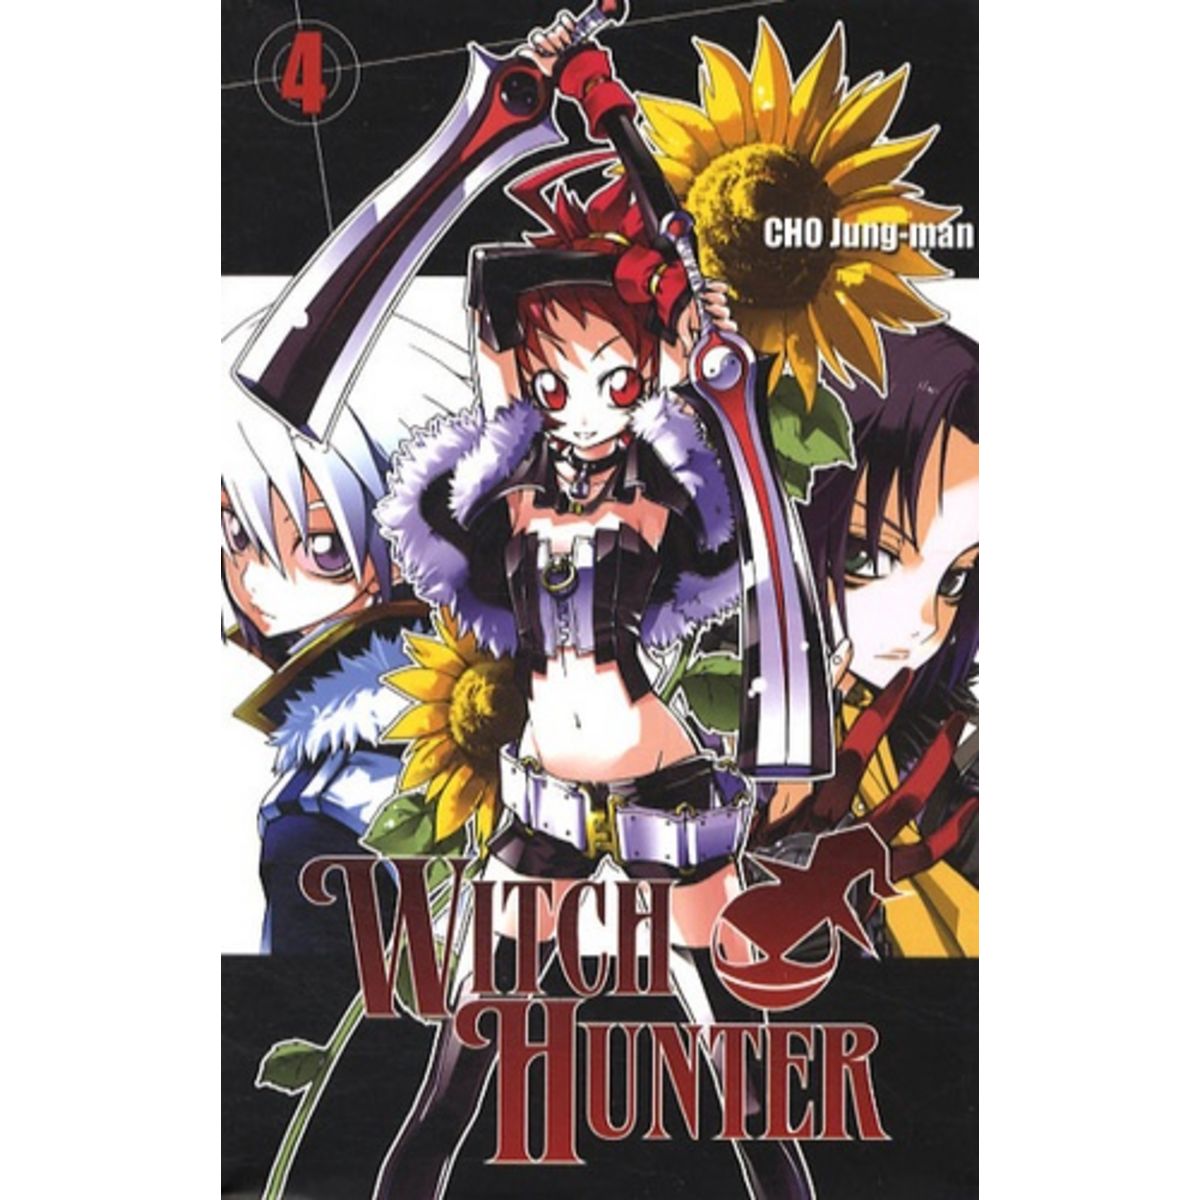  WITCH HUNTER TOME 4, Cho Jung-man